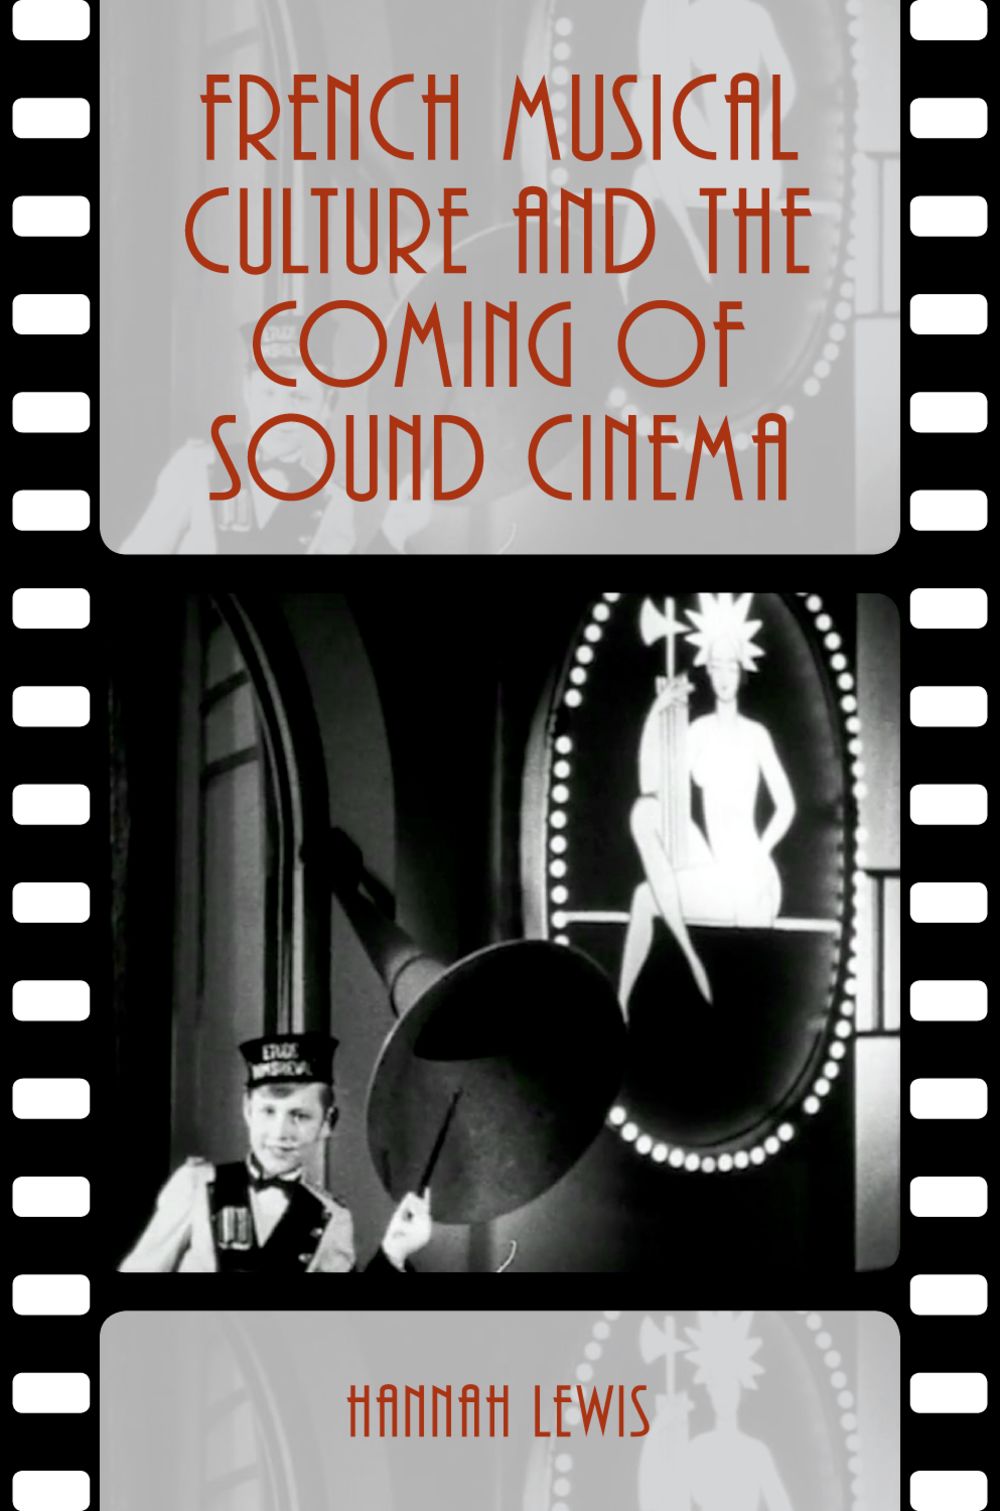 French Musical Culture & Coming Of Sound Cinema Pb Sheet Music Songbook